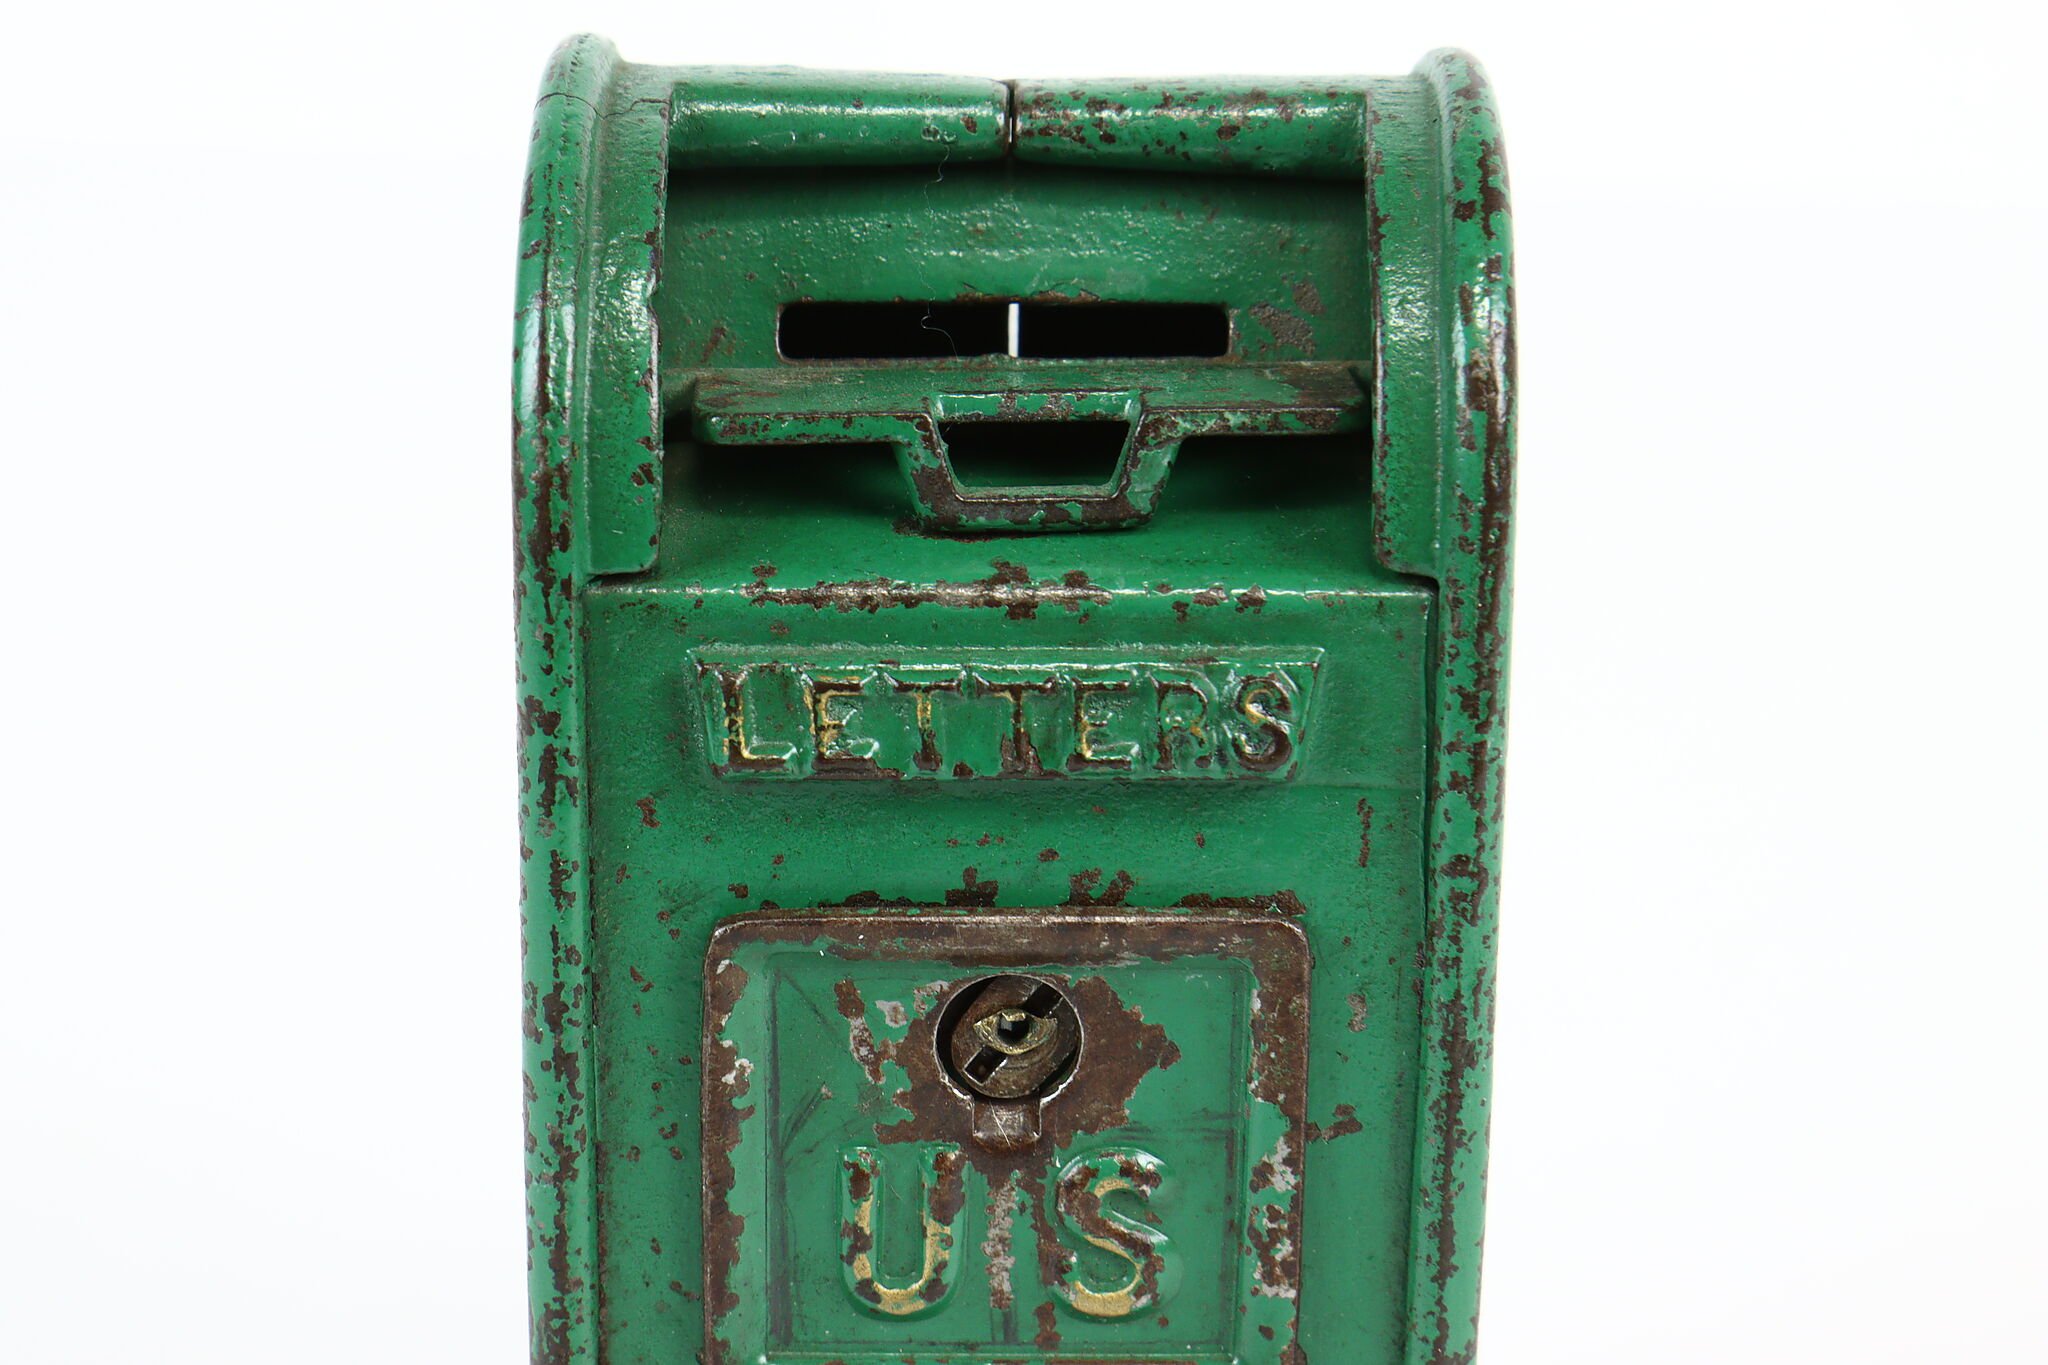 FREE SHIPPING VINTAGE MAILBOX COIN BANK WITH LOCK & KEY NEW IN THE BOX,USA 